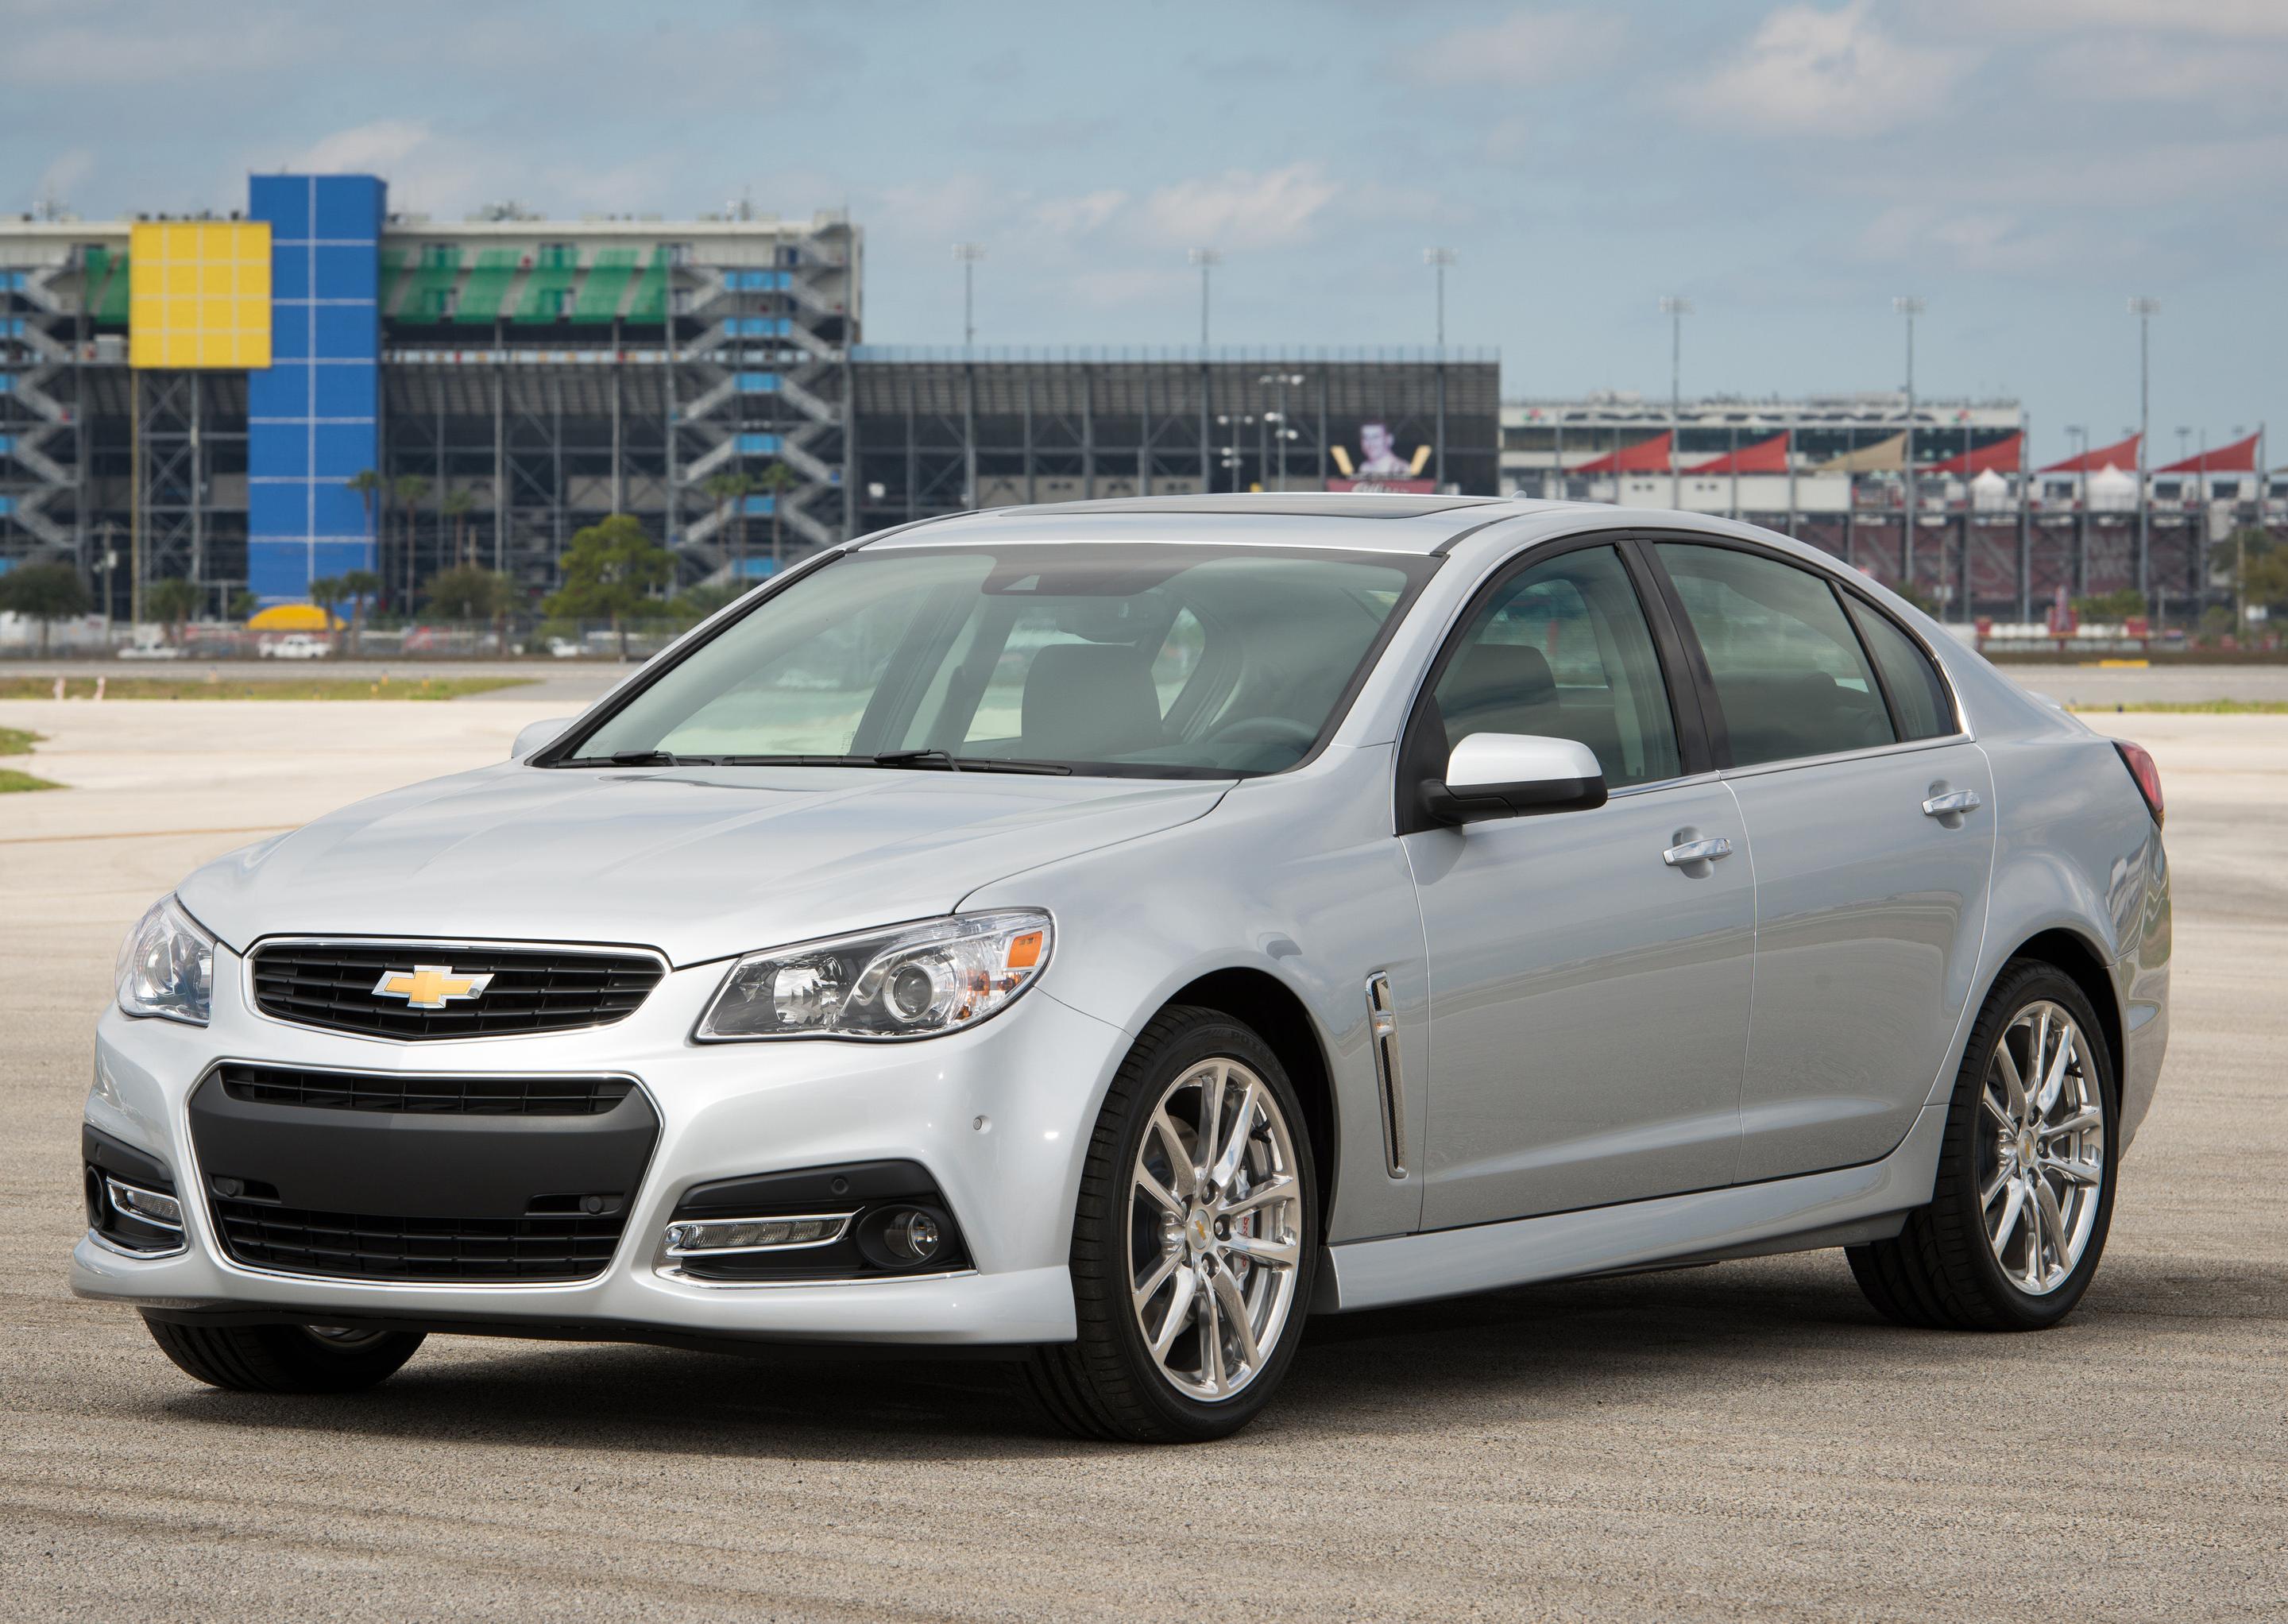 The Chevy SS: The new sedan with Corvette soul